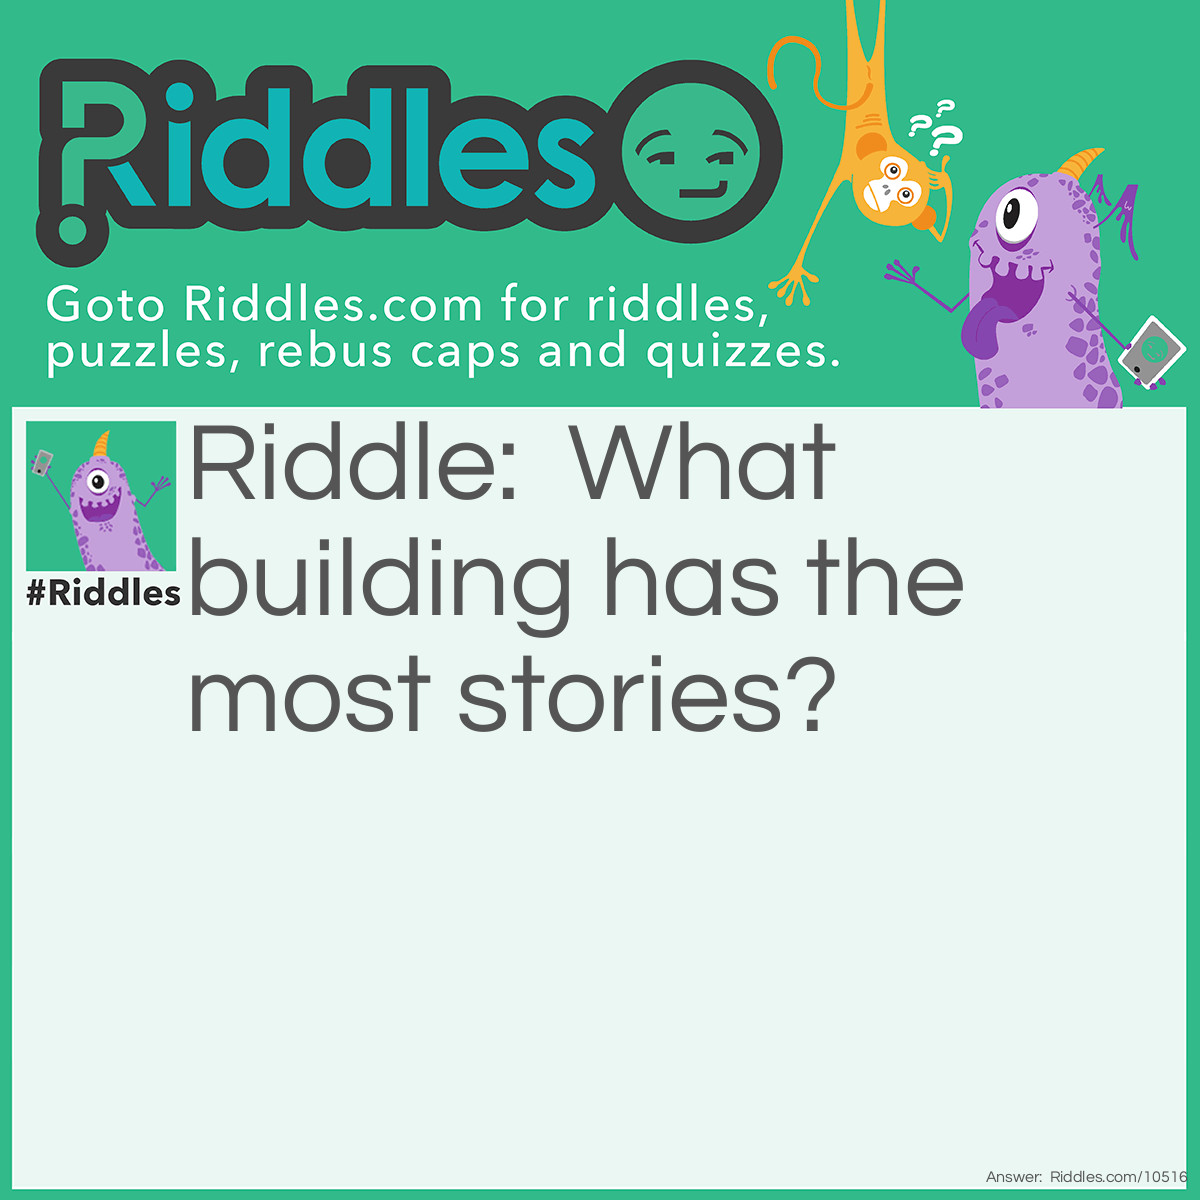 Riddle: What building has the most stories? Answer: A library.